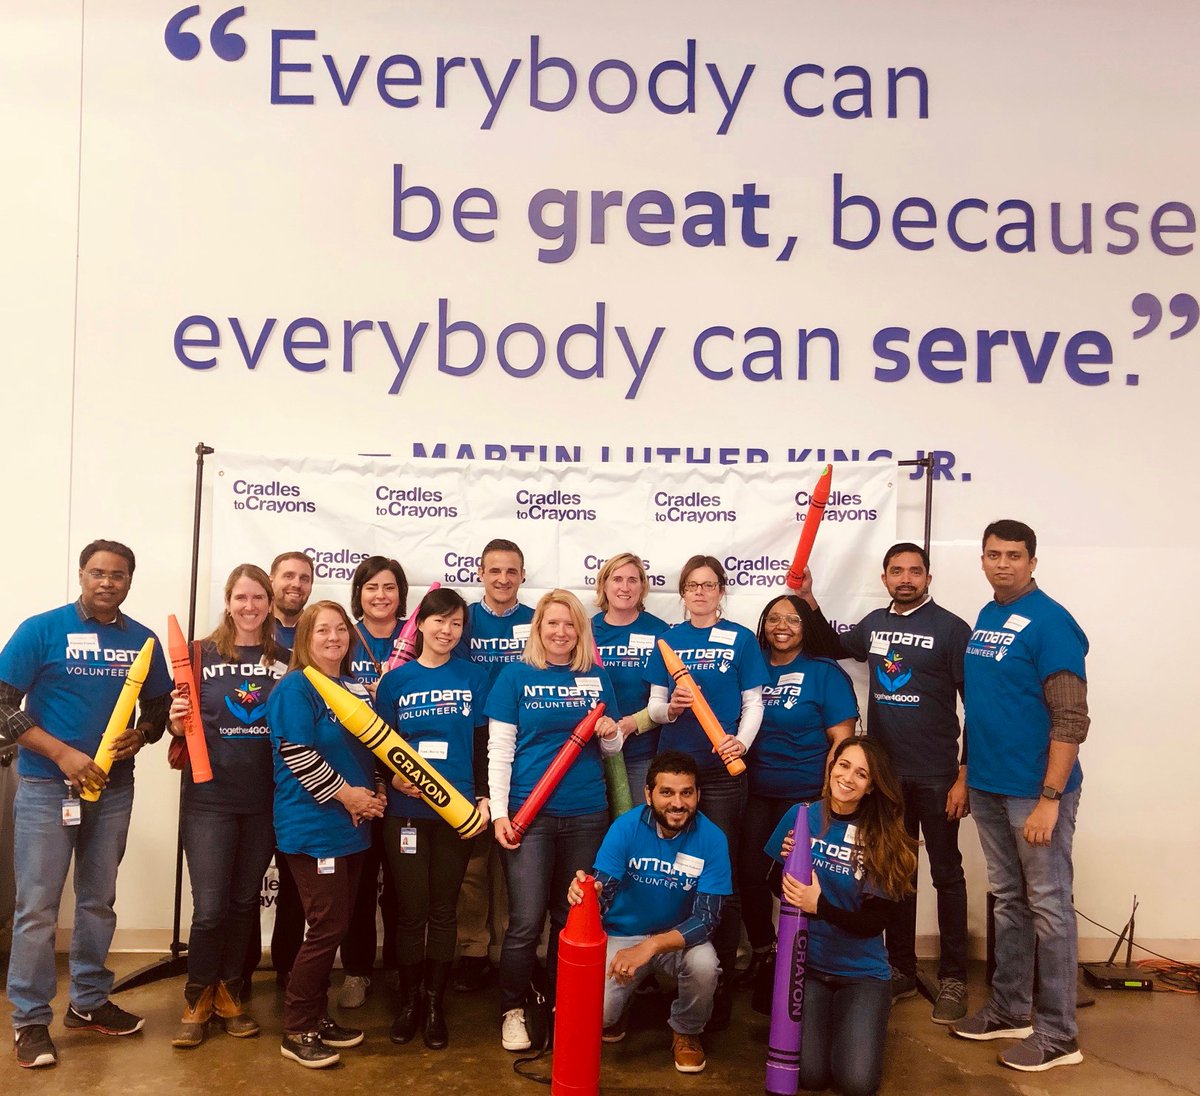 Meaningful day spent with colleagues at Cradles to Crayons during NTT DATA Global Volunteer Week. #nttdatagivesback #globalvolunteerweek #together4good #nttdata @NTTDATAServices